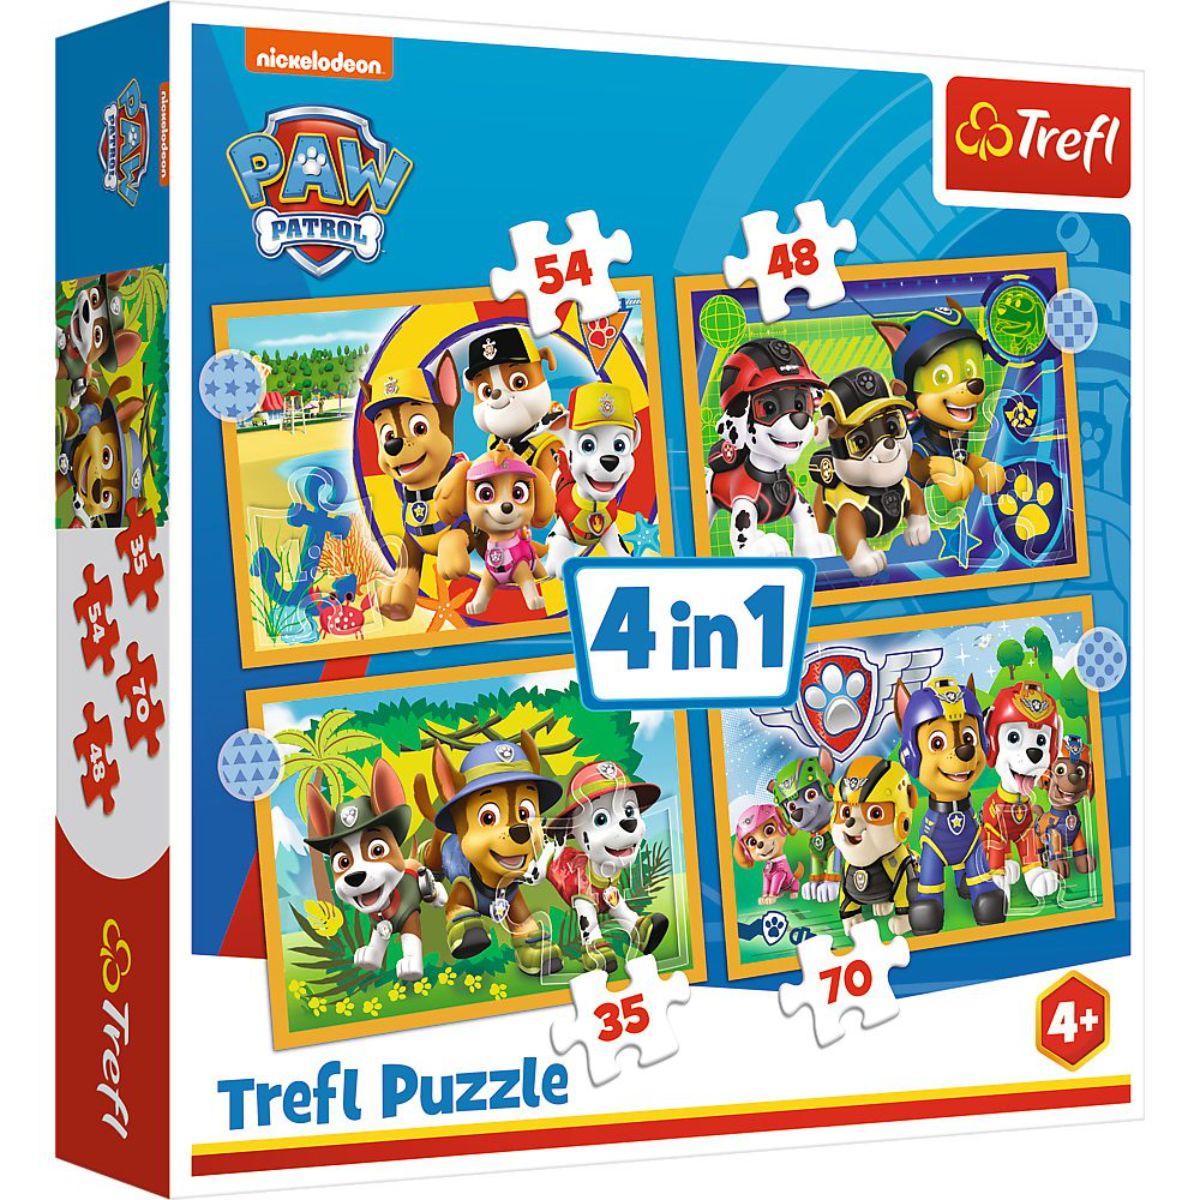 Puzzle Trefl 4 in 1, In vacanta, Paw Patrol (35, 48, 54, 70 piese)